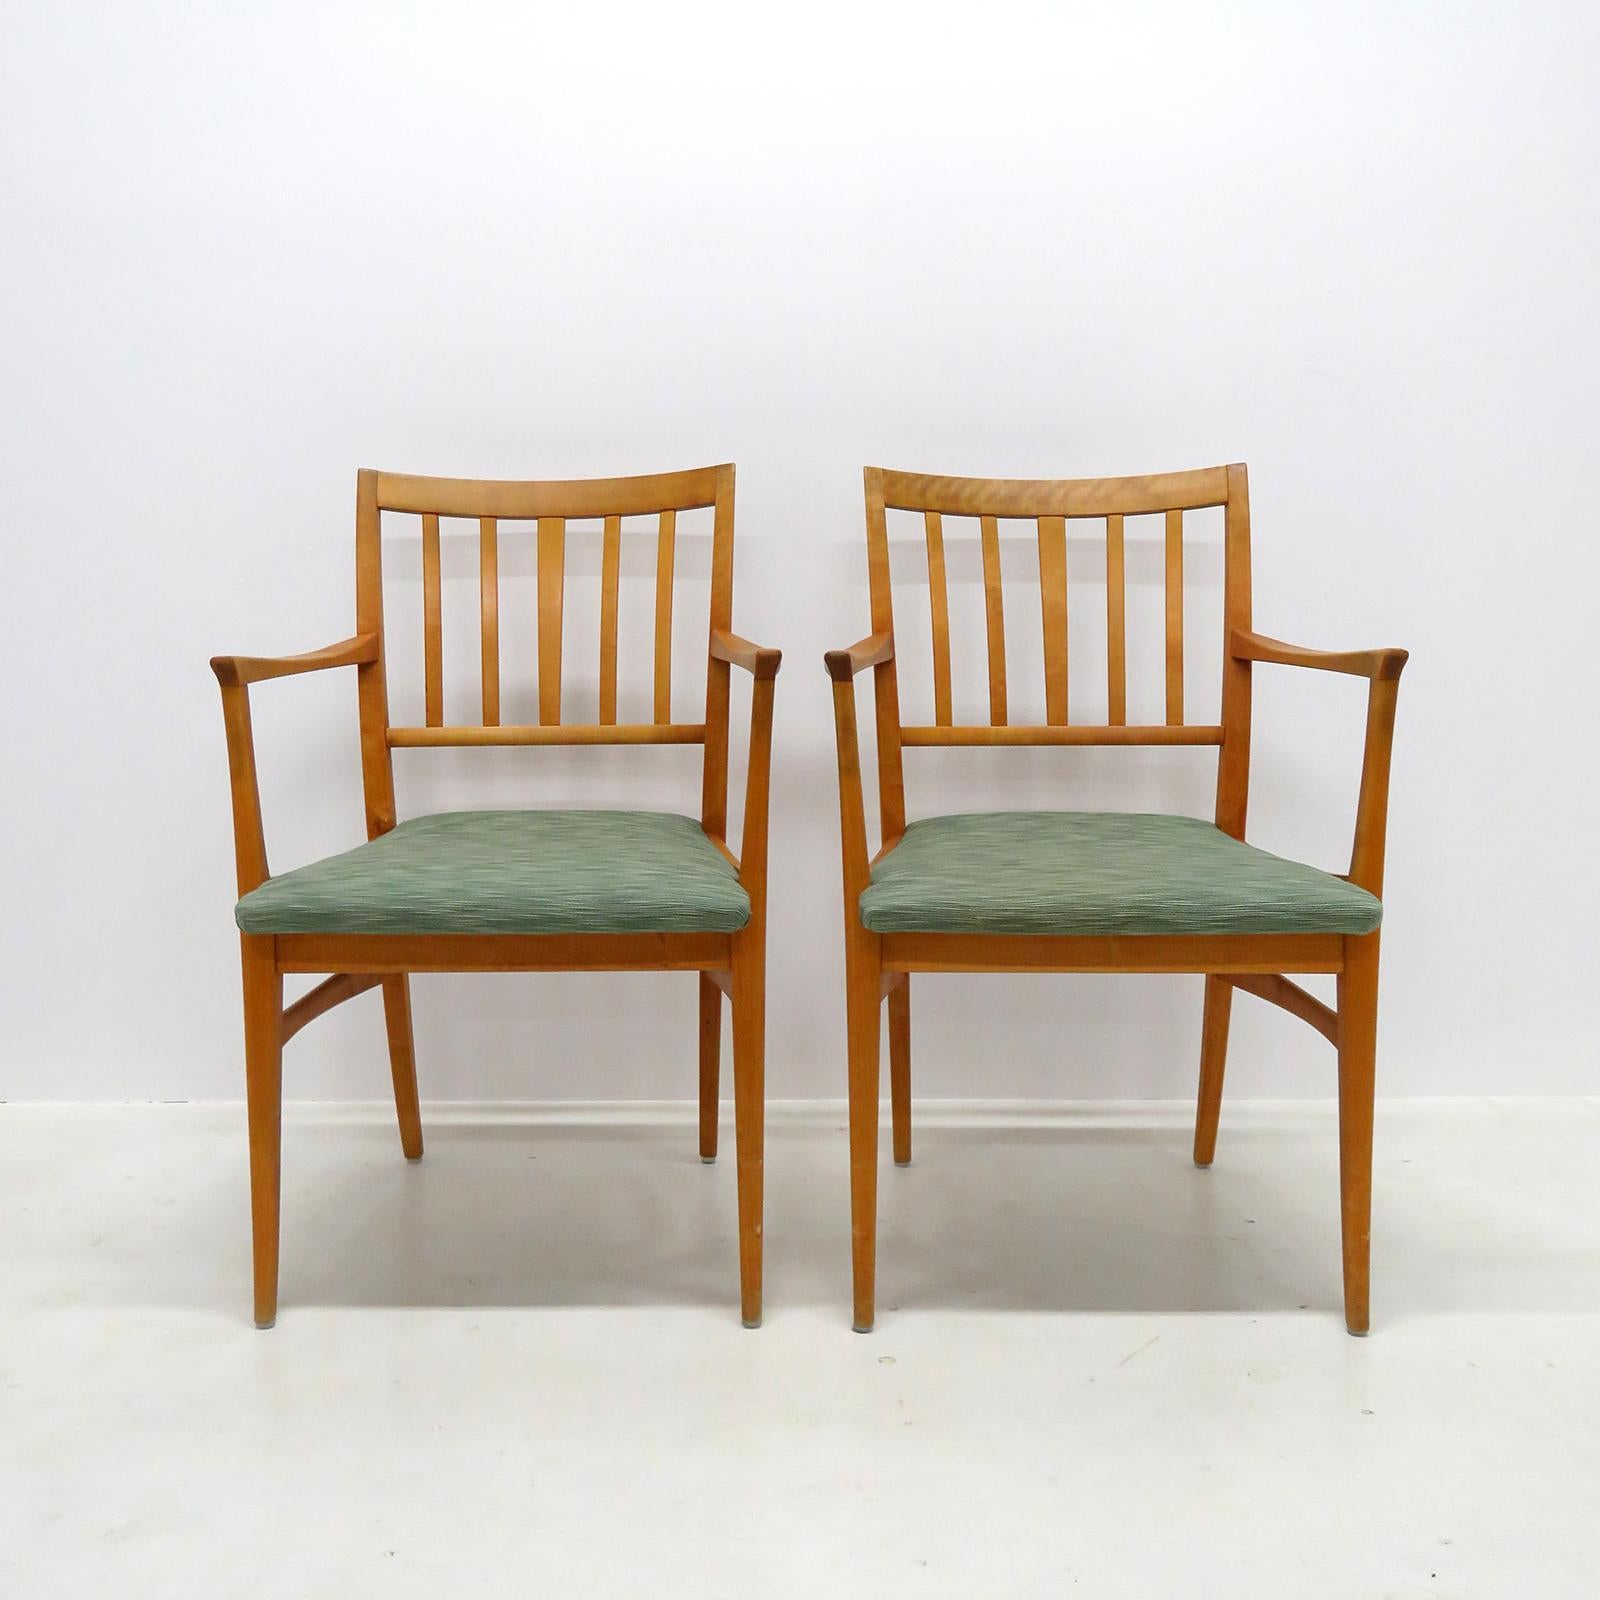 Wonderful set of six dining chairs in beech, by Carl Malmsten for Waggeryds Möbelfabrik AB, Sweden, 1950, all with arm rests and upholstered seats.